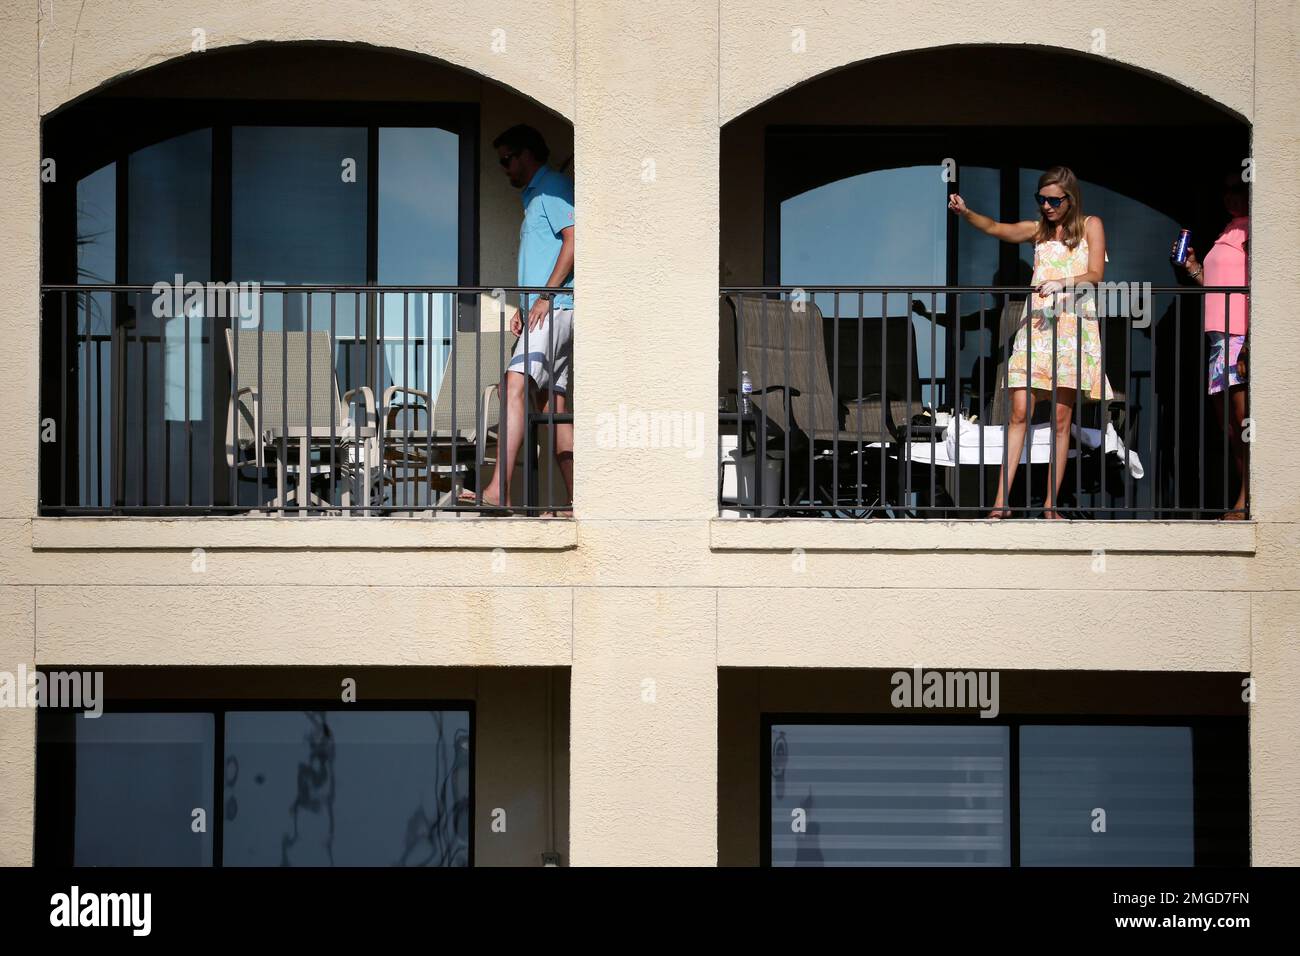 A few fans watch from a balcony overlooking the 18th hole during the final round of the RBC Heritage golf tournament, Sunday, June 21, 2020, in Hilton Head Island, S.C